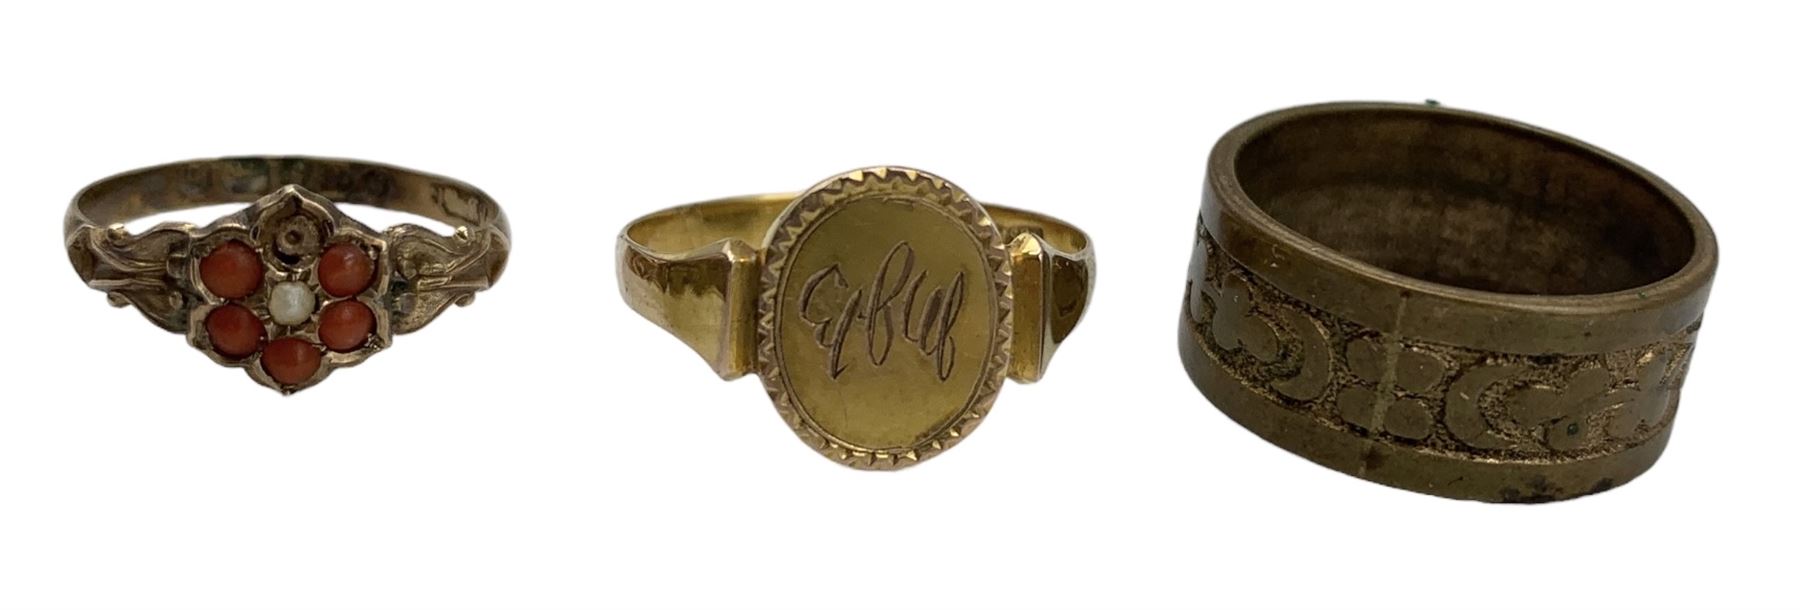 Early 20th century 9ct gold signet ring - Image 4 of 4